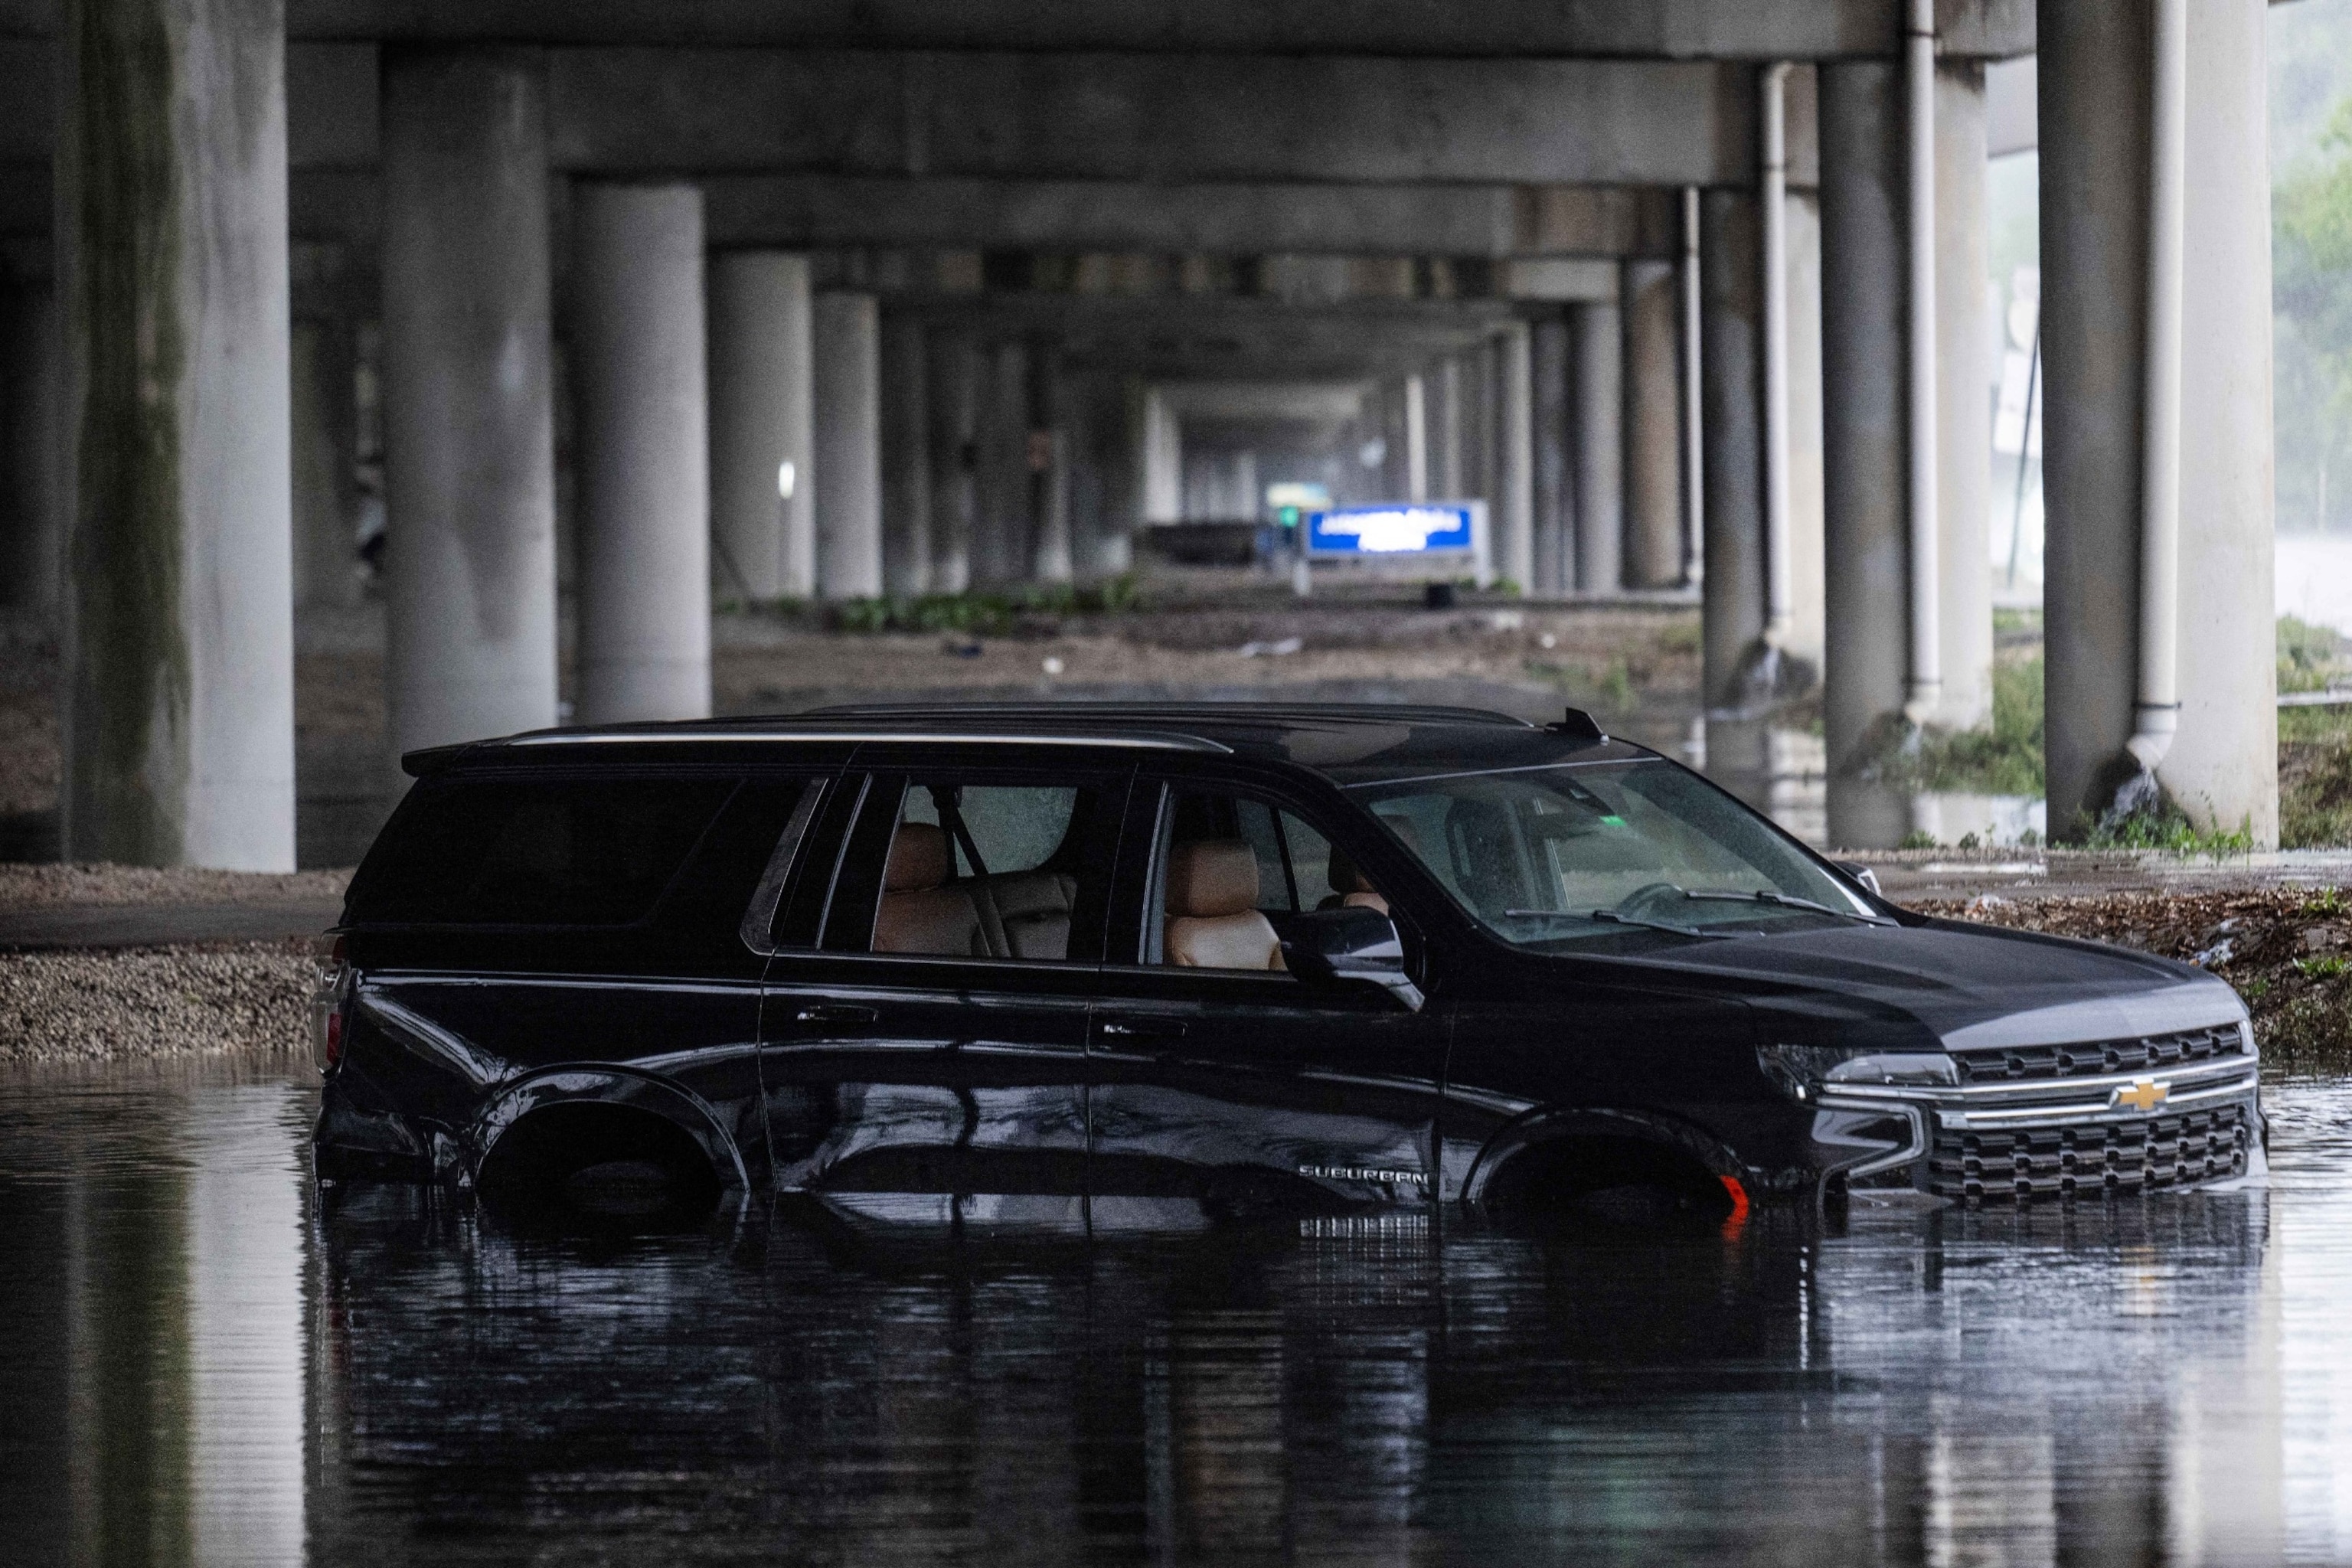 PHOTO: An abandoned car sits submerged in flood waters near the Fort Lauderdale-Hollywood International Airport in Fort Lauderdale, Florida, on June 13, 2024, after heavy rainfall hit the area.